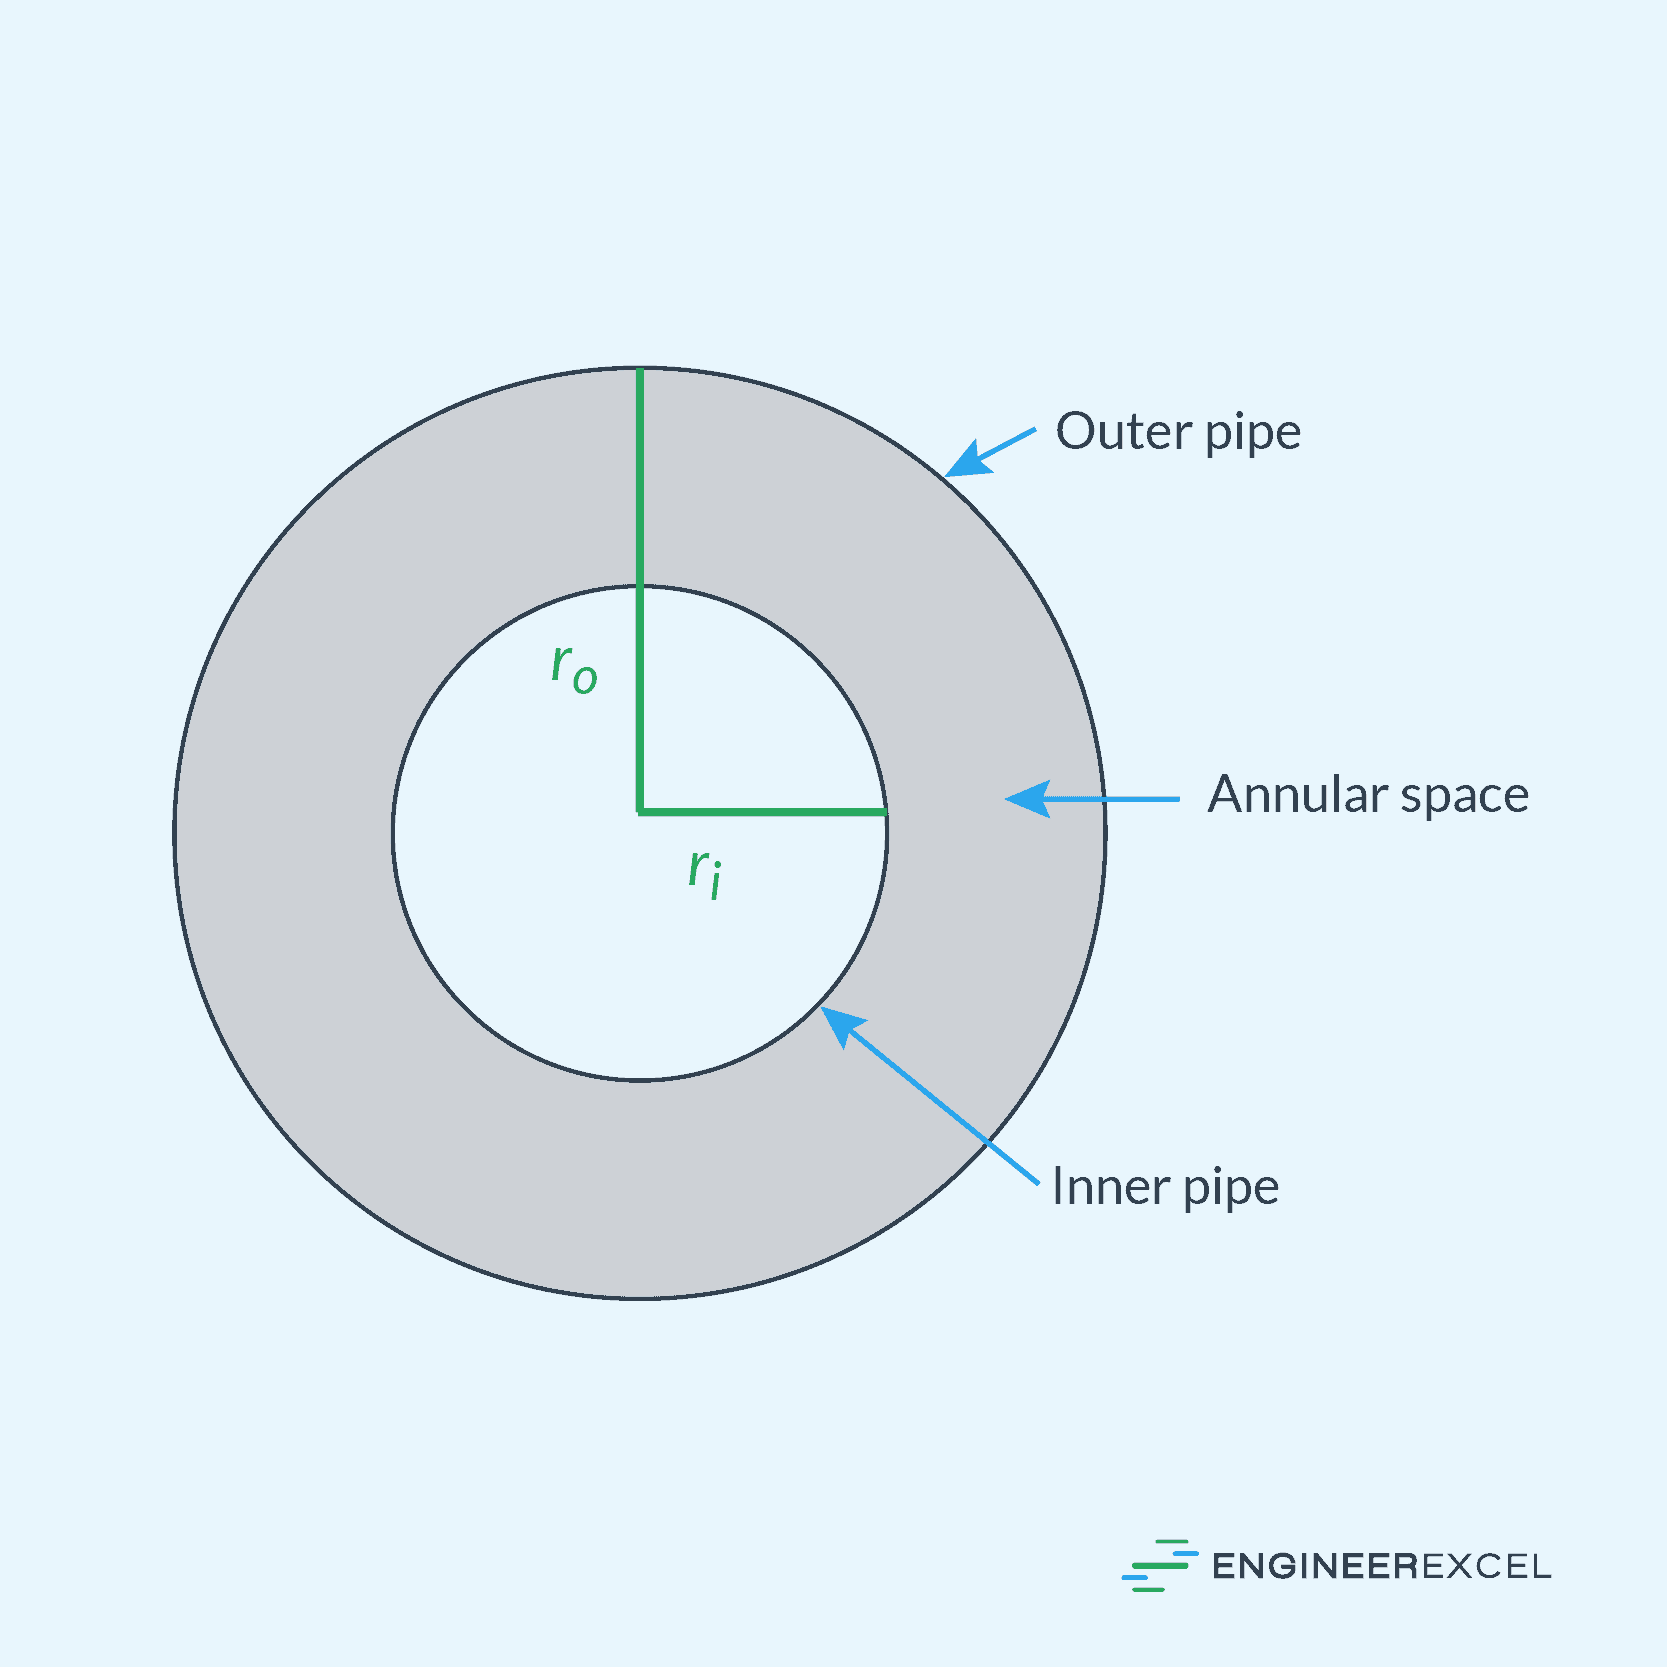 Cross-section of an annular space bounded by concentric pipes